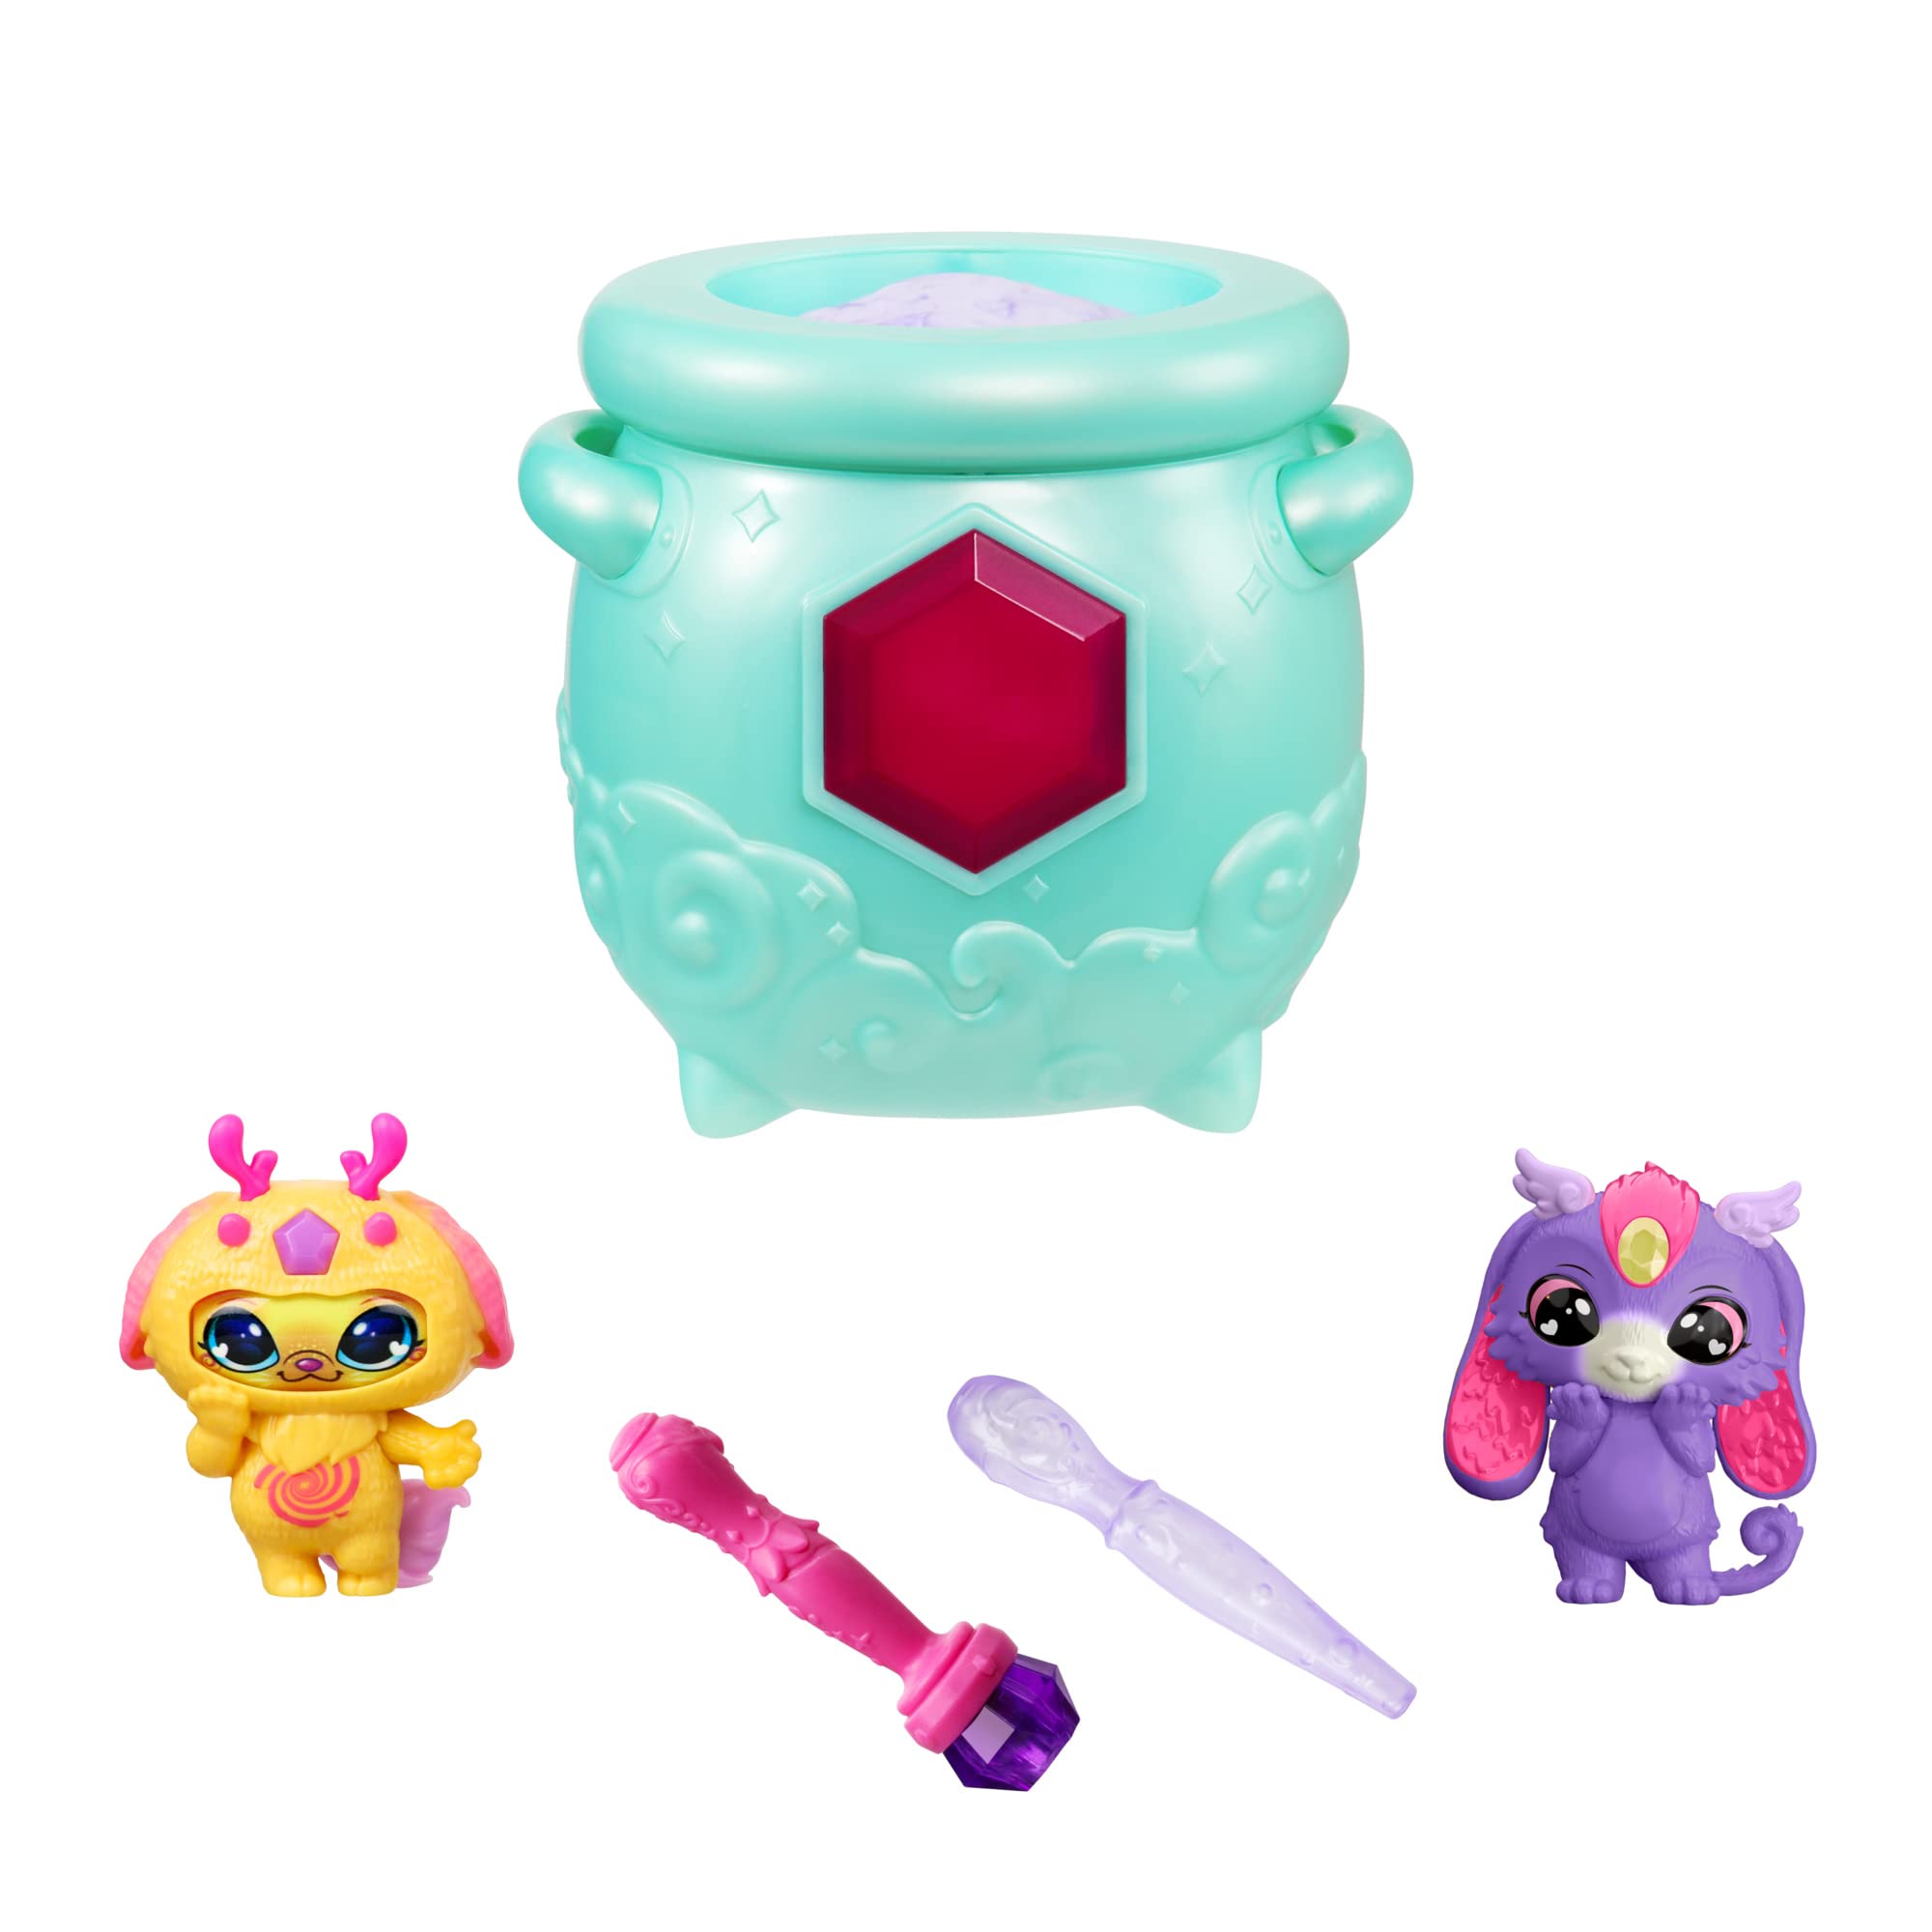 Magic Mixies Mixlings Tap & Reveal Cauldron 2 Pack, Magic Wand Reveals Magic Power, Power Unleashed Series, for Kids Aged 5 and Up (Styles May Vary), Multicolor (14696)